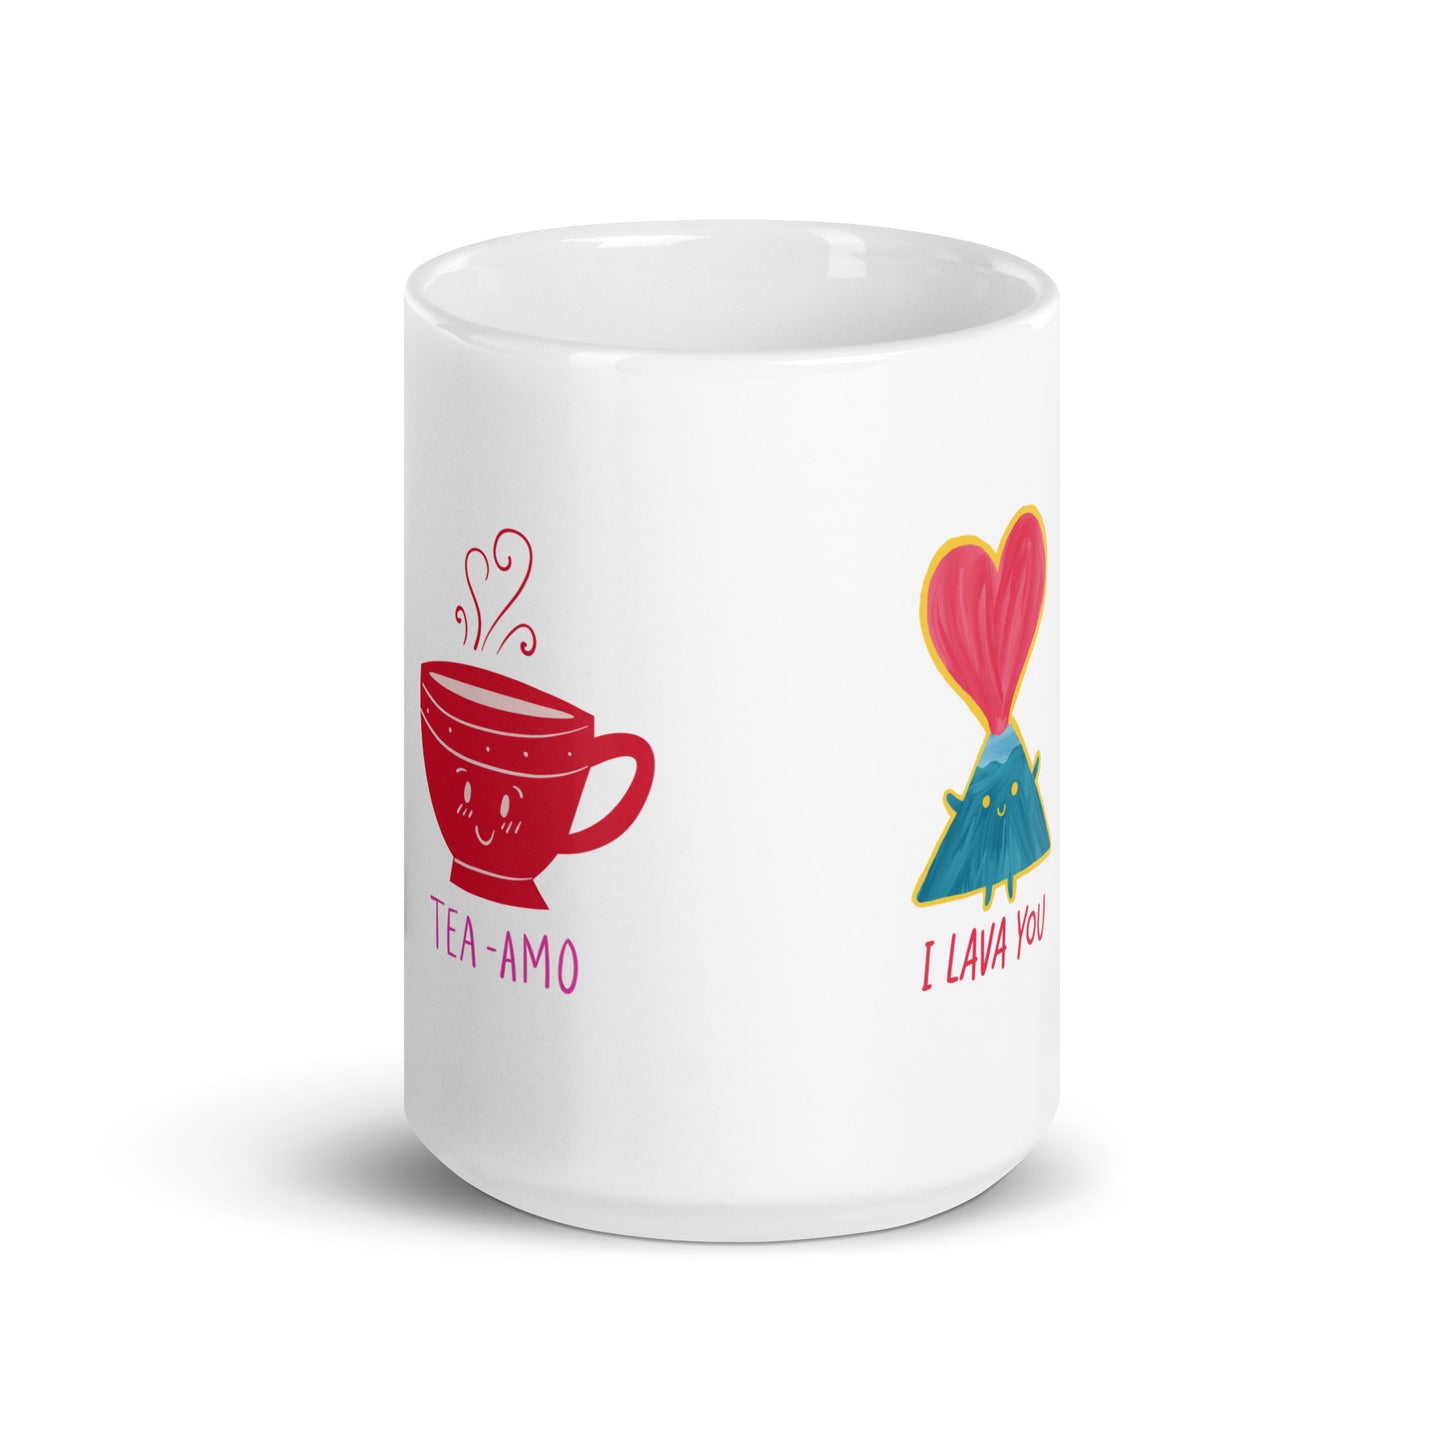 Cute Couple - White Glossy Mug Set for Adorable Moments | Perfect Gift for Partners